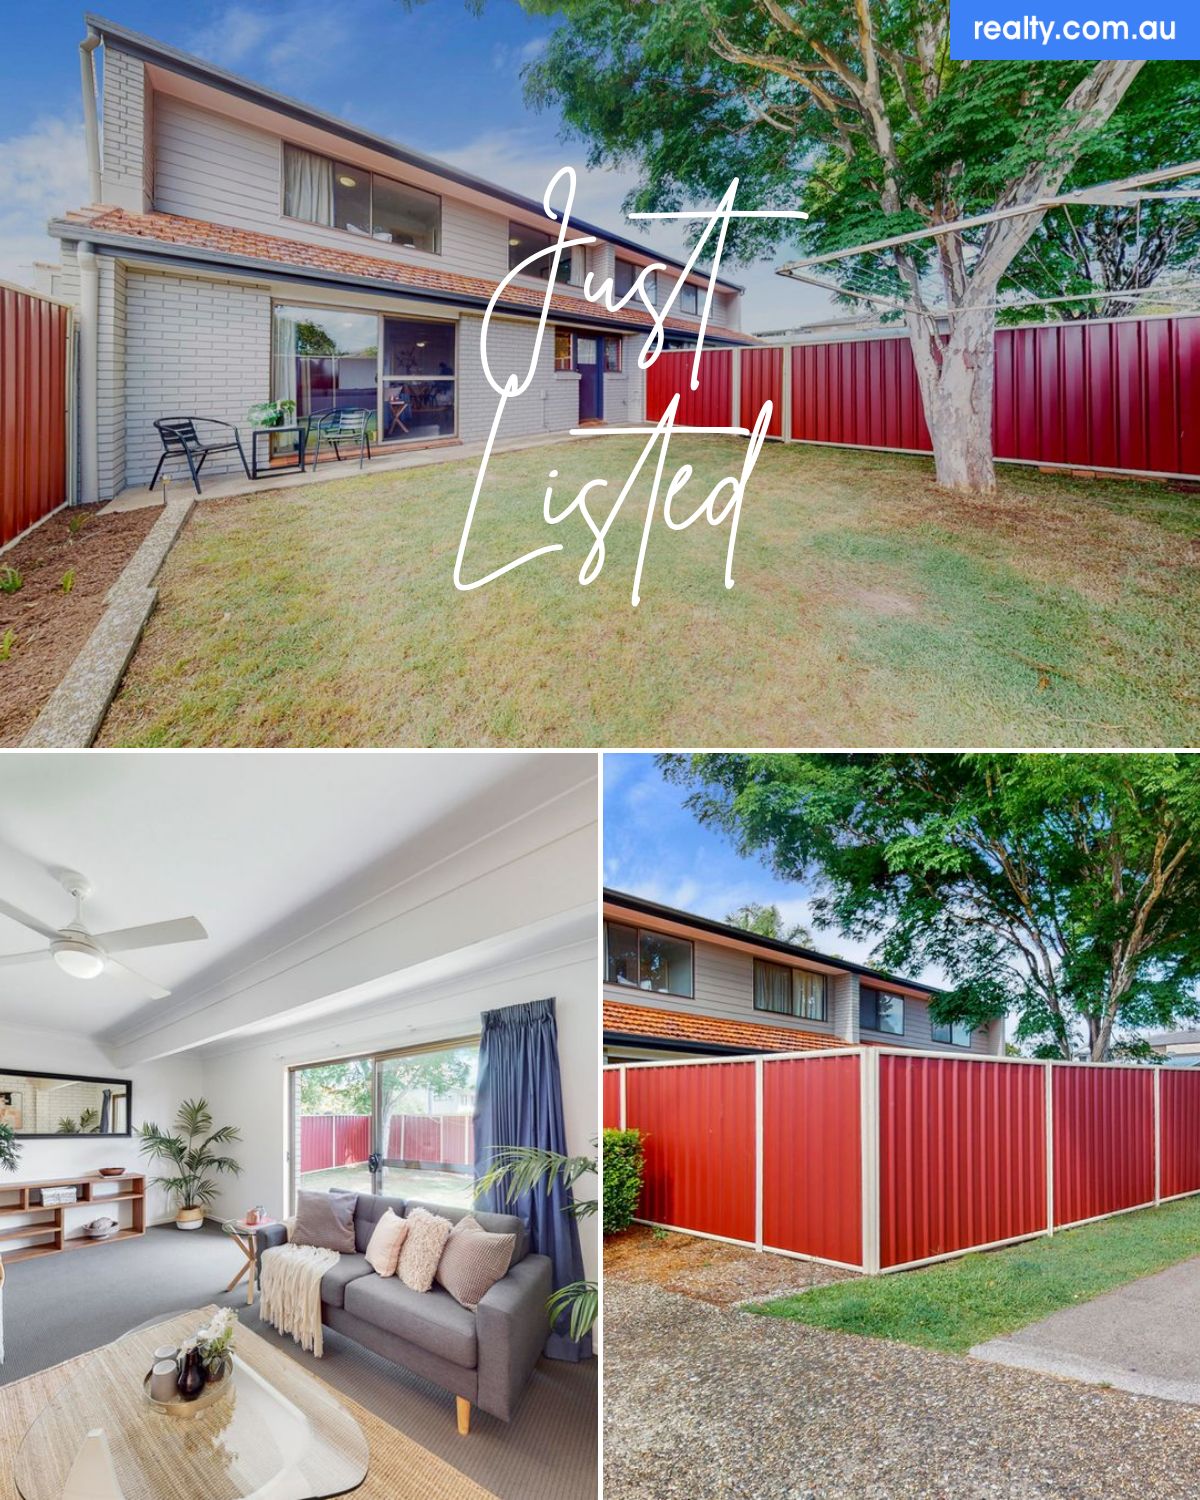 3/22 Beverley Avenue, Rochedale South, QLD 4123 | Realty.com.au